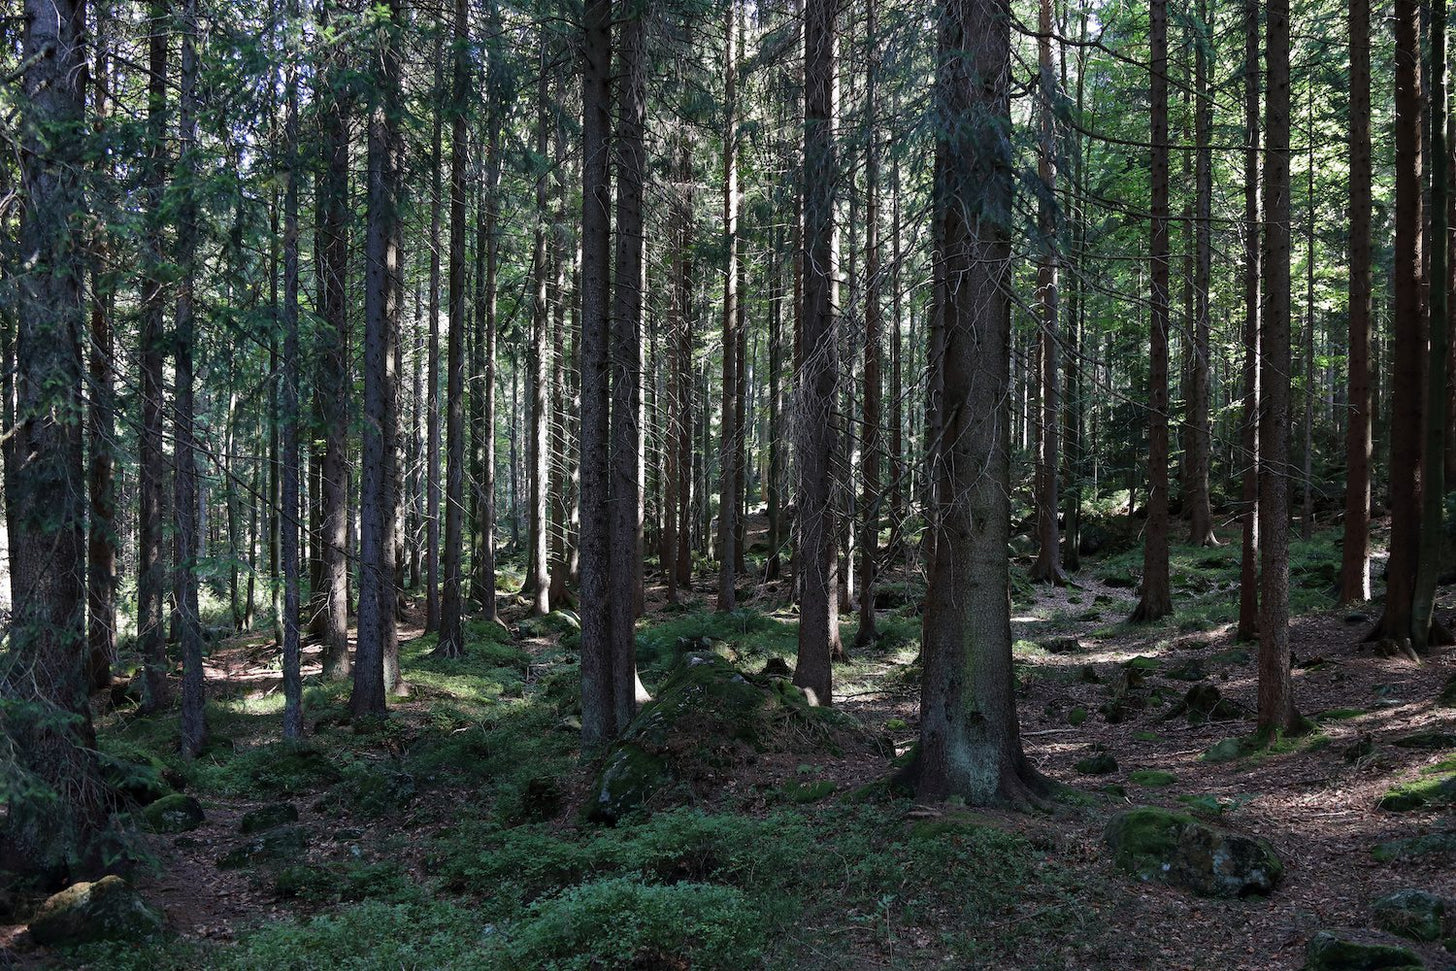 A forest of tall, thin conifers with the sunlight filtering down to the forest floor.